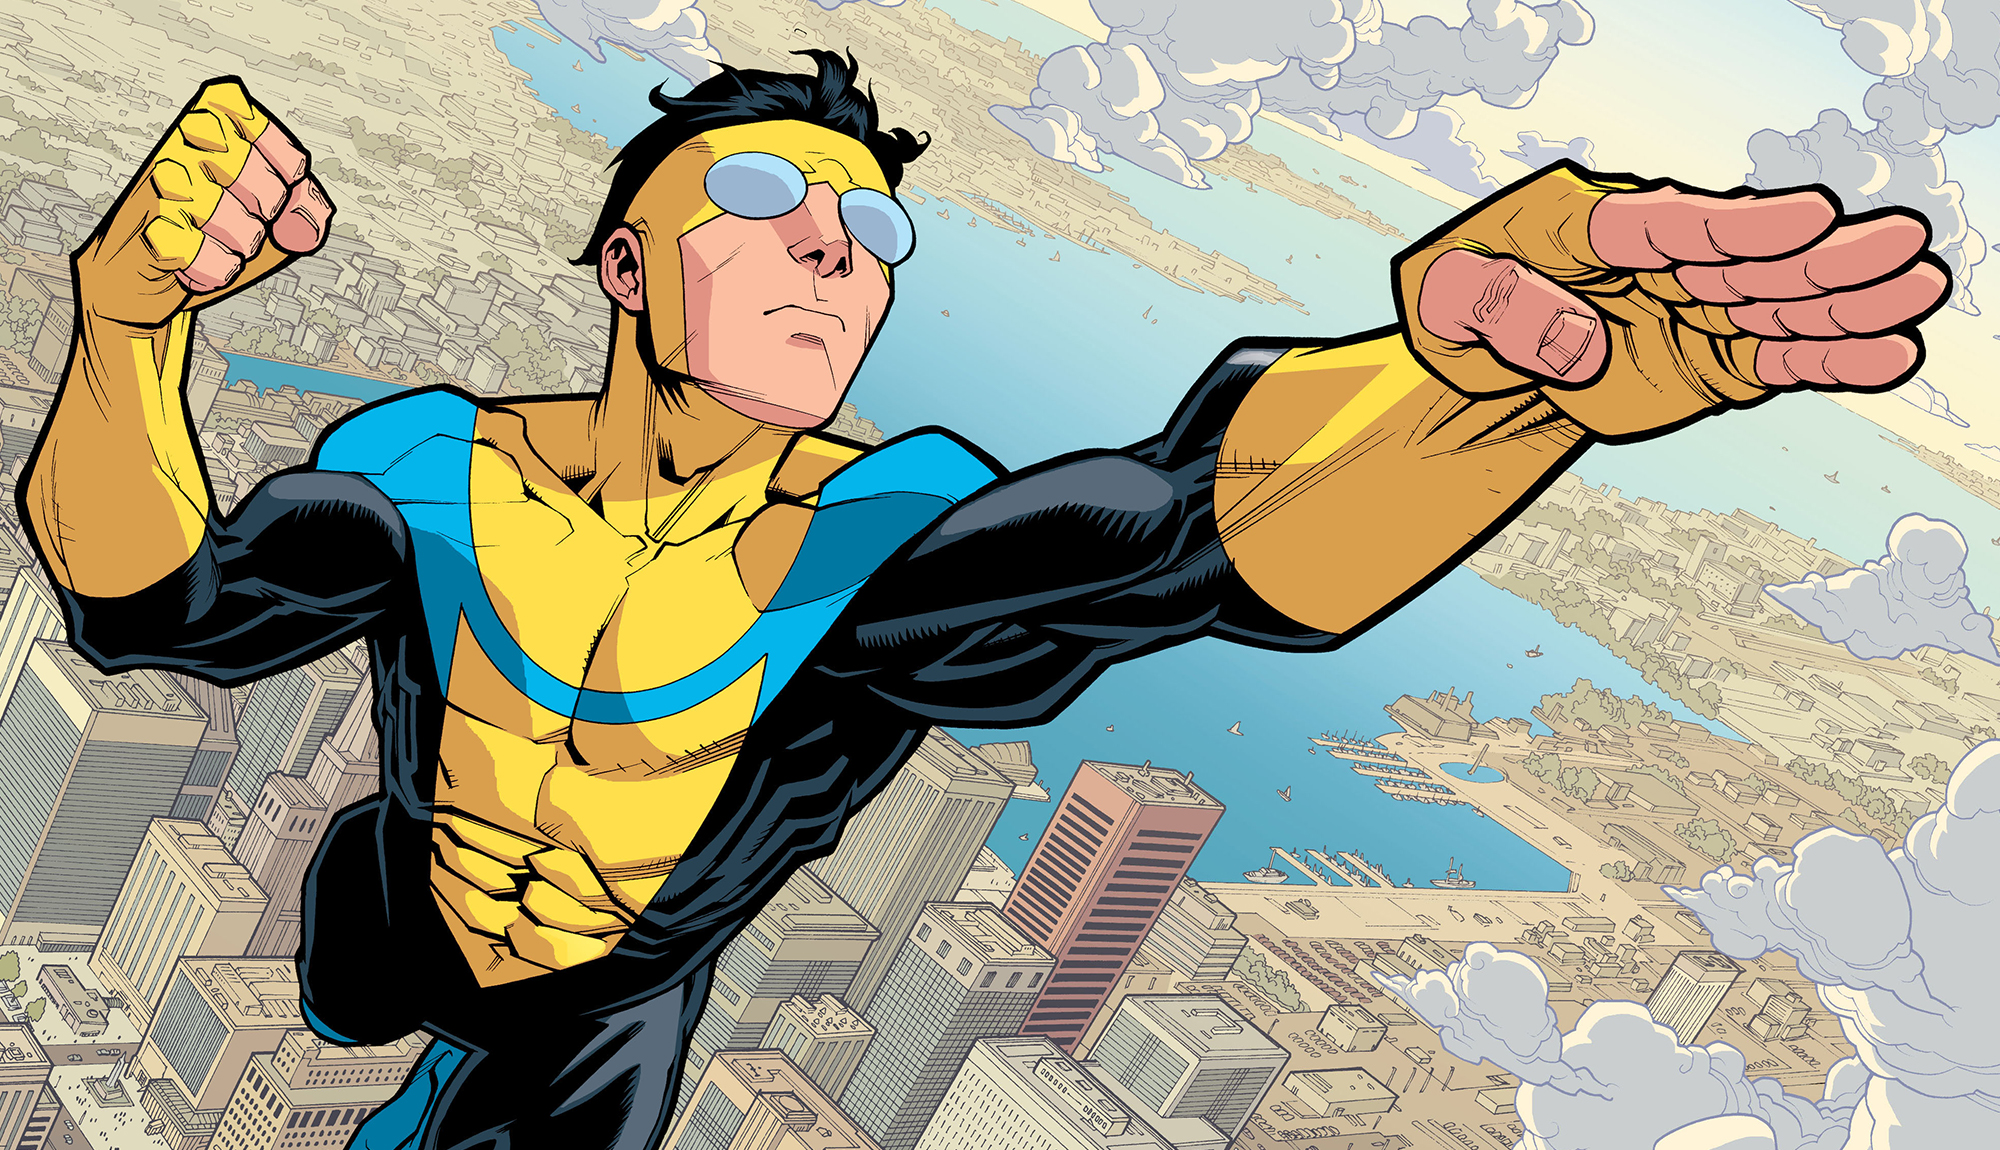 HD wallpaper of Invincible (Mark Grayson) flying over a cityscape, based on Image Comics series.